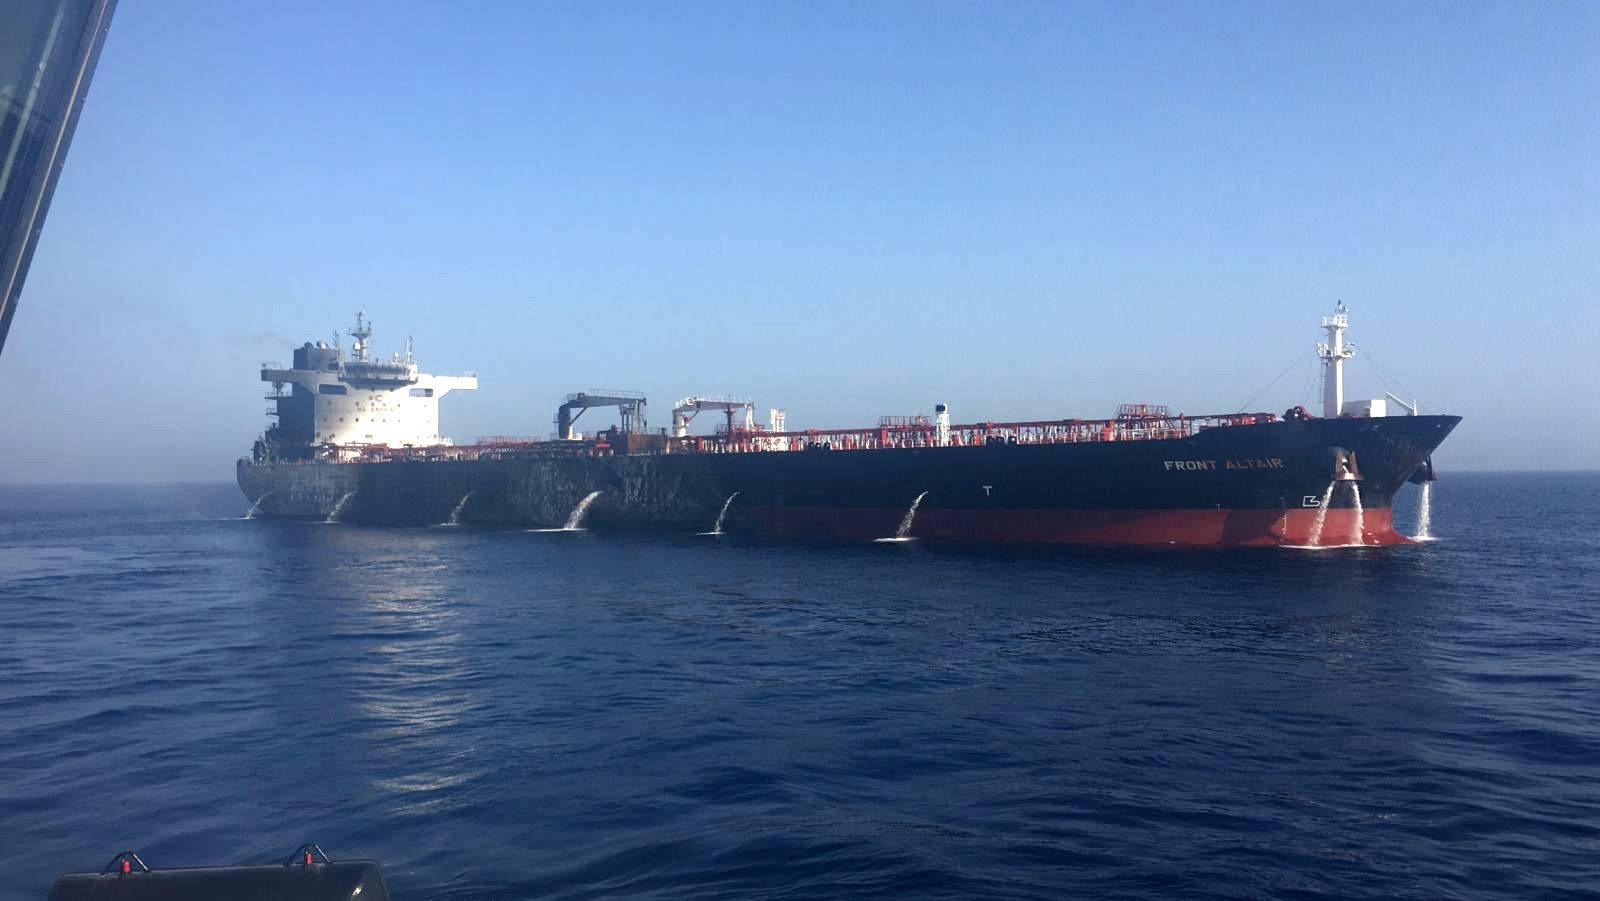 A handout photo made available by the Norwegian shipowner Frontline of the crude oil tanker Front Altair after the fire onboard the ship in the Gulf of Oman